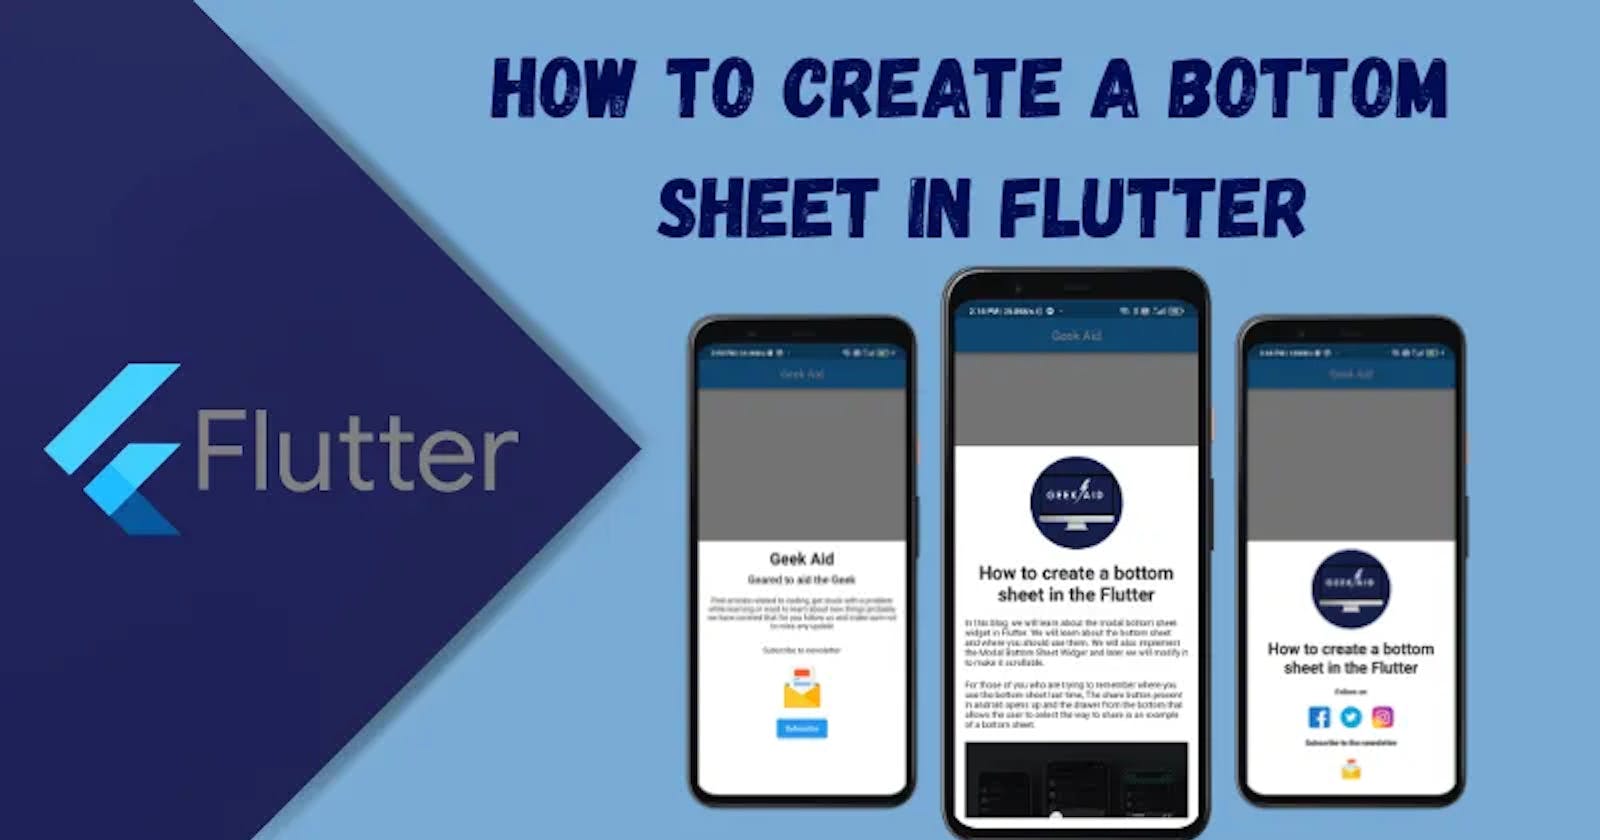 How to create a bottom sheet in Flutter